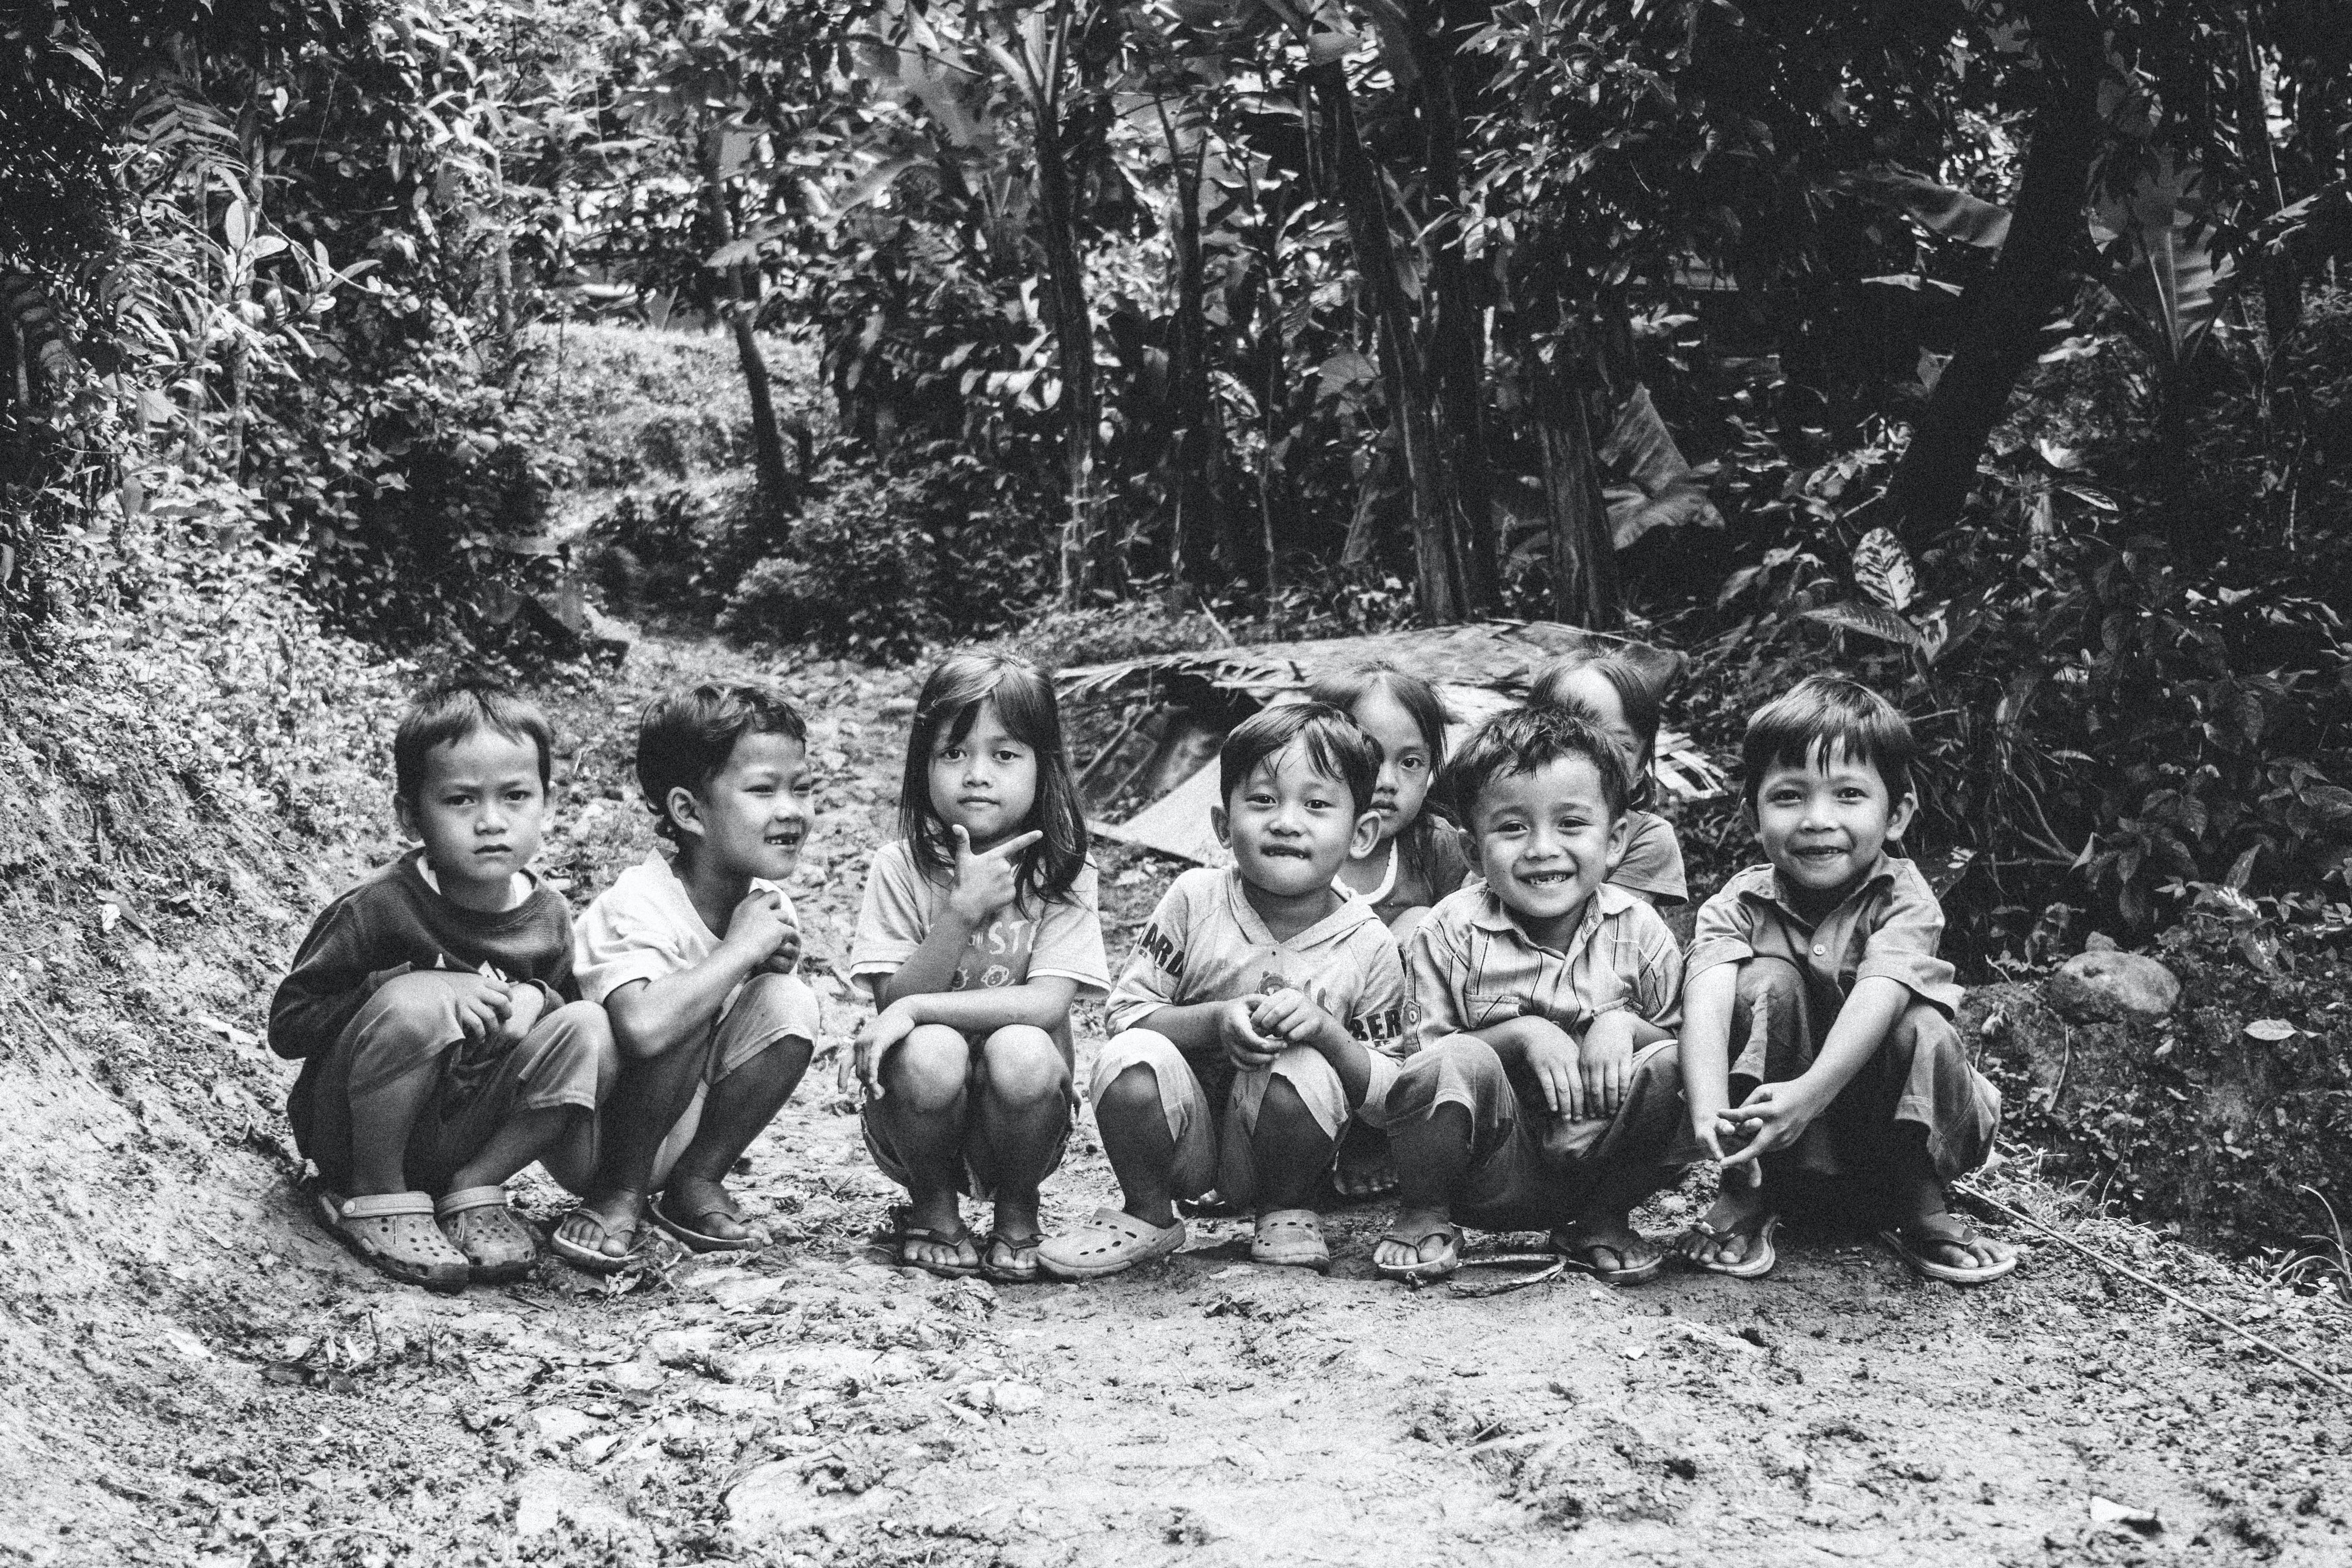 A group of young Asian children sitting on a path outdoors